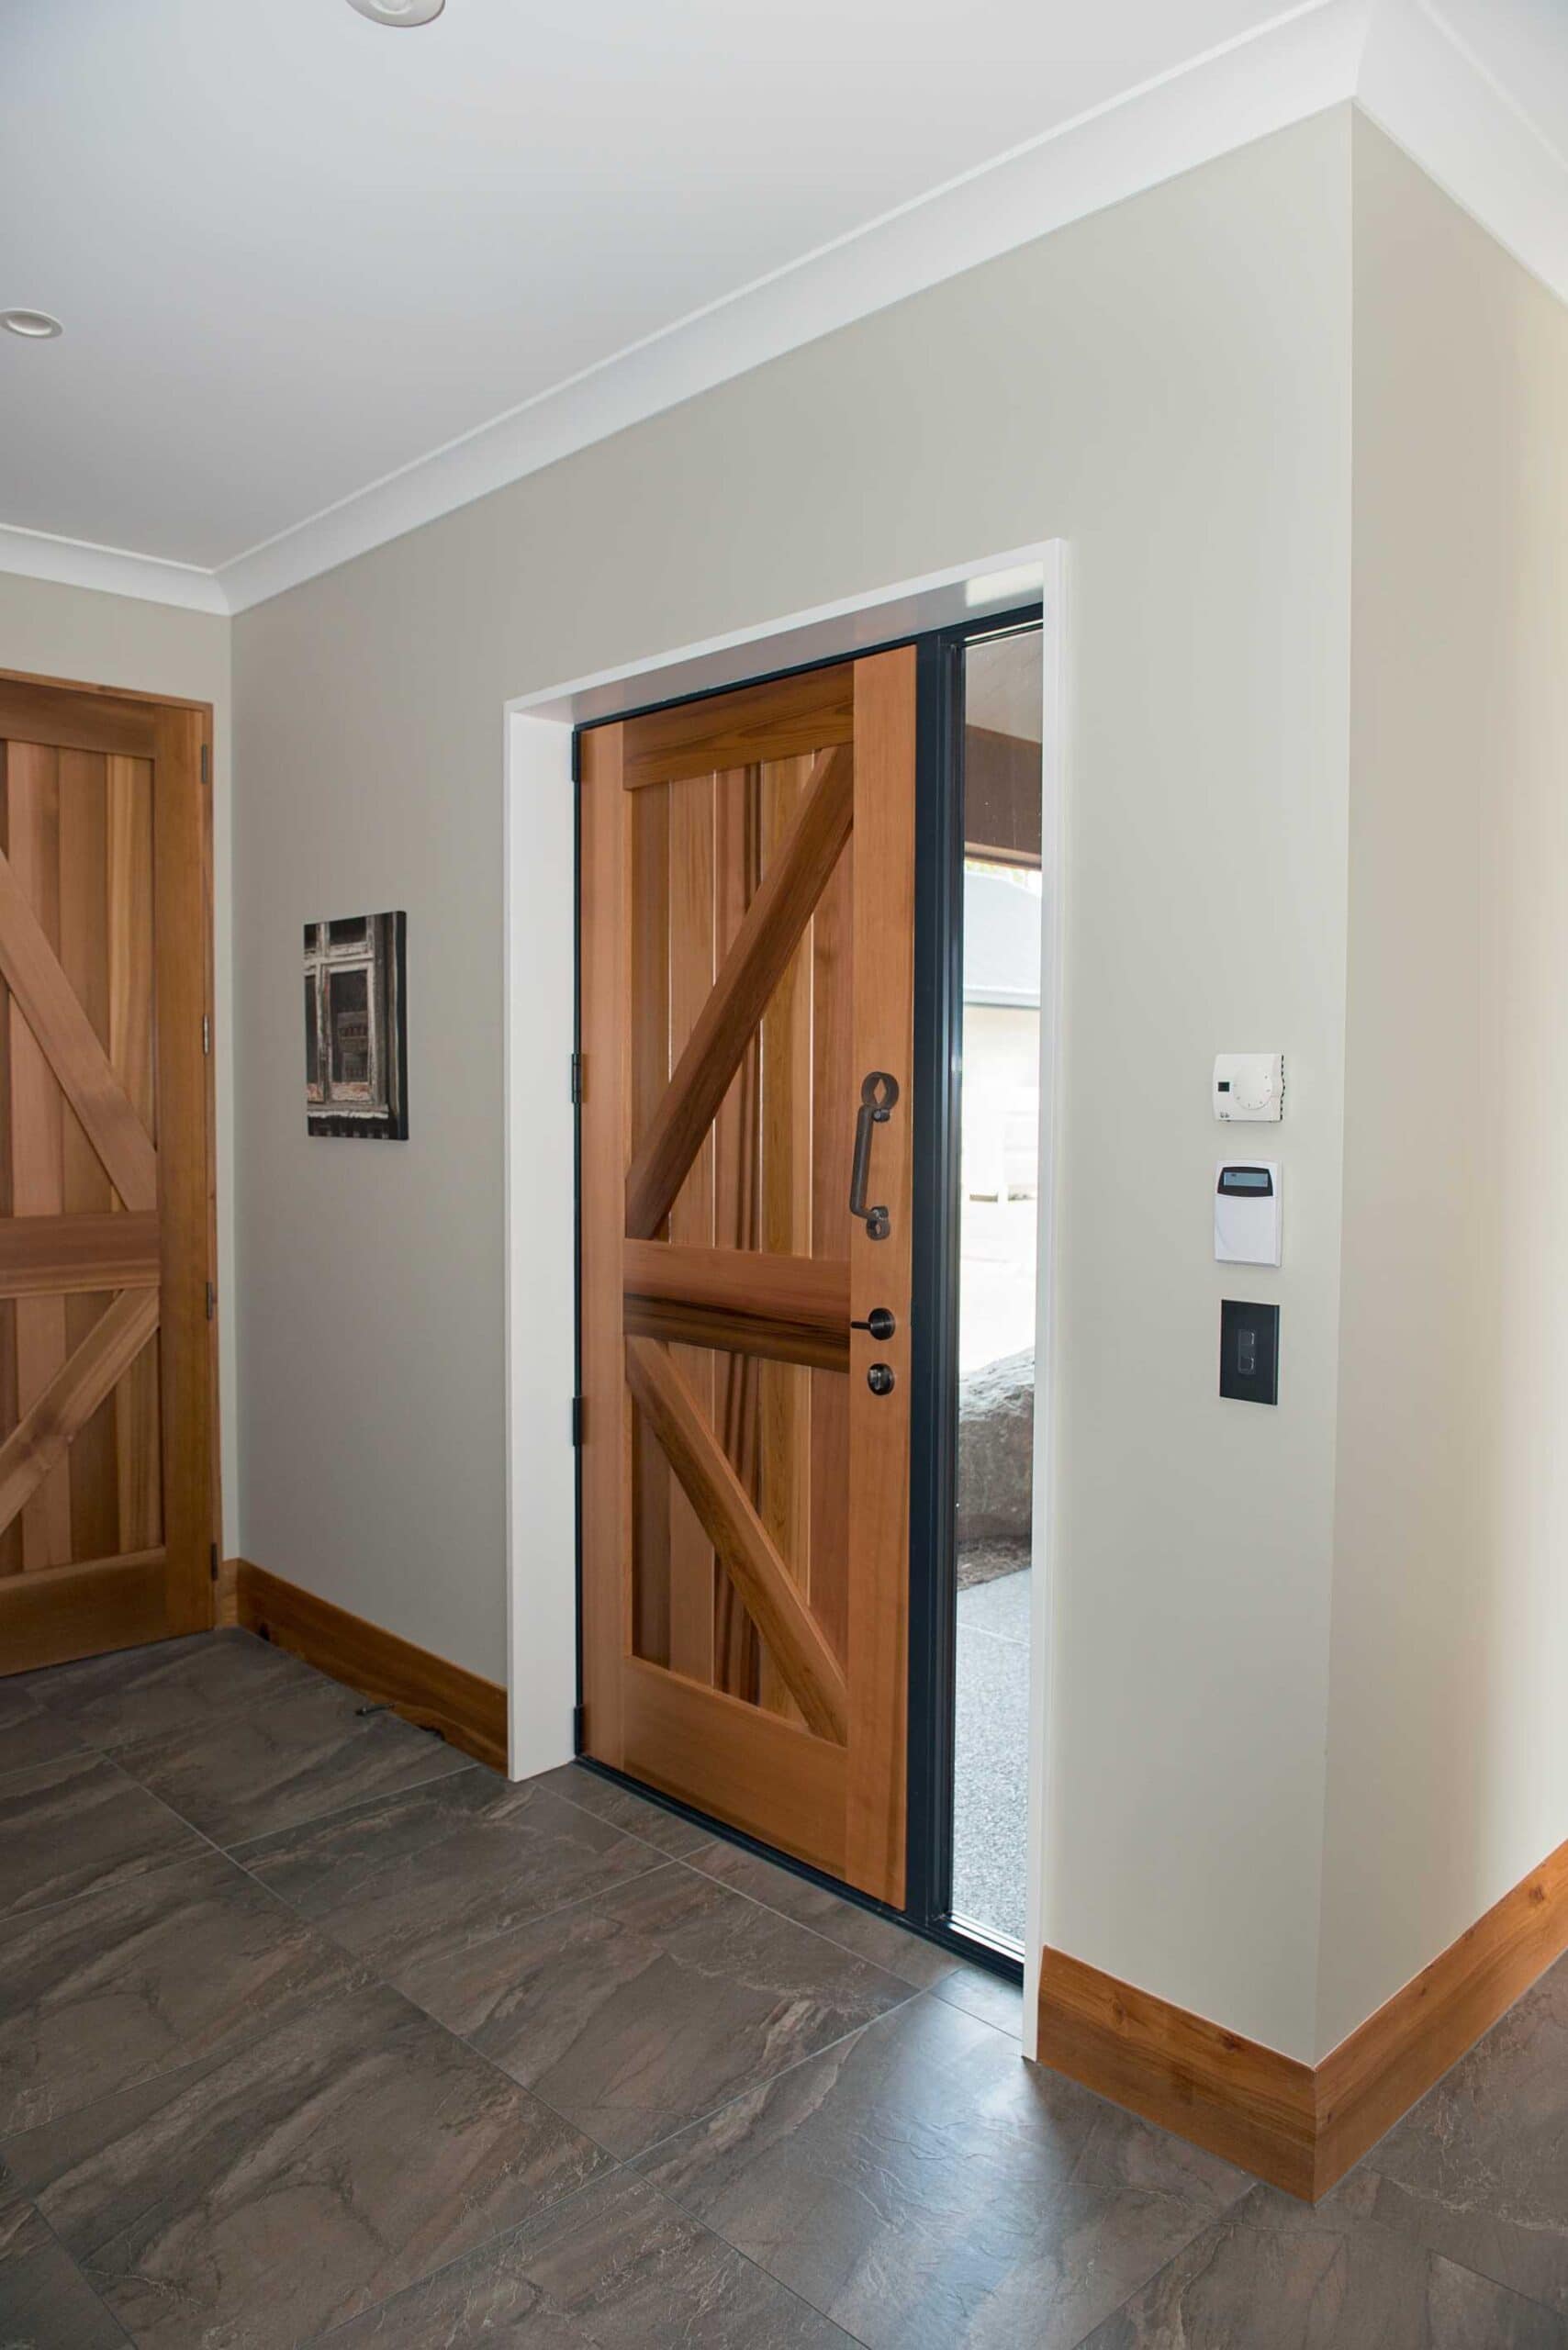  These external doors were made with recycled timber and farm implements for the door handles